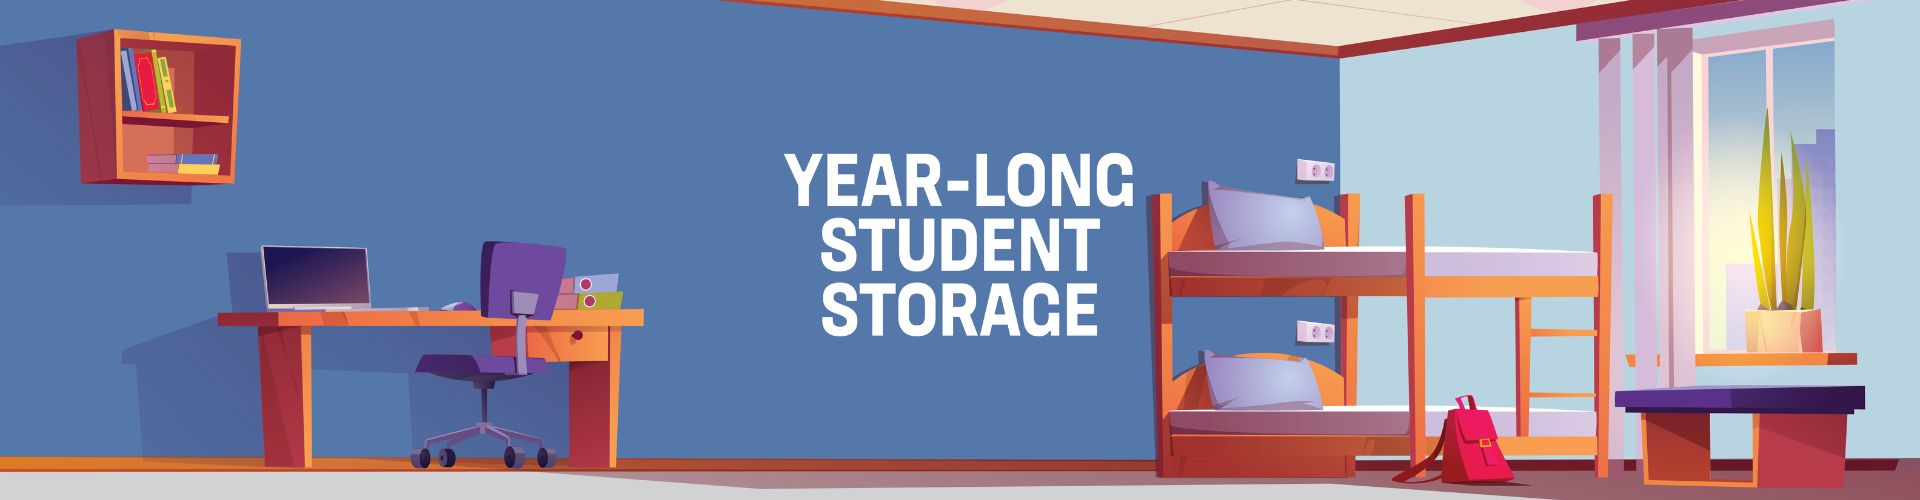 Your Extra Closet - year-long student storage